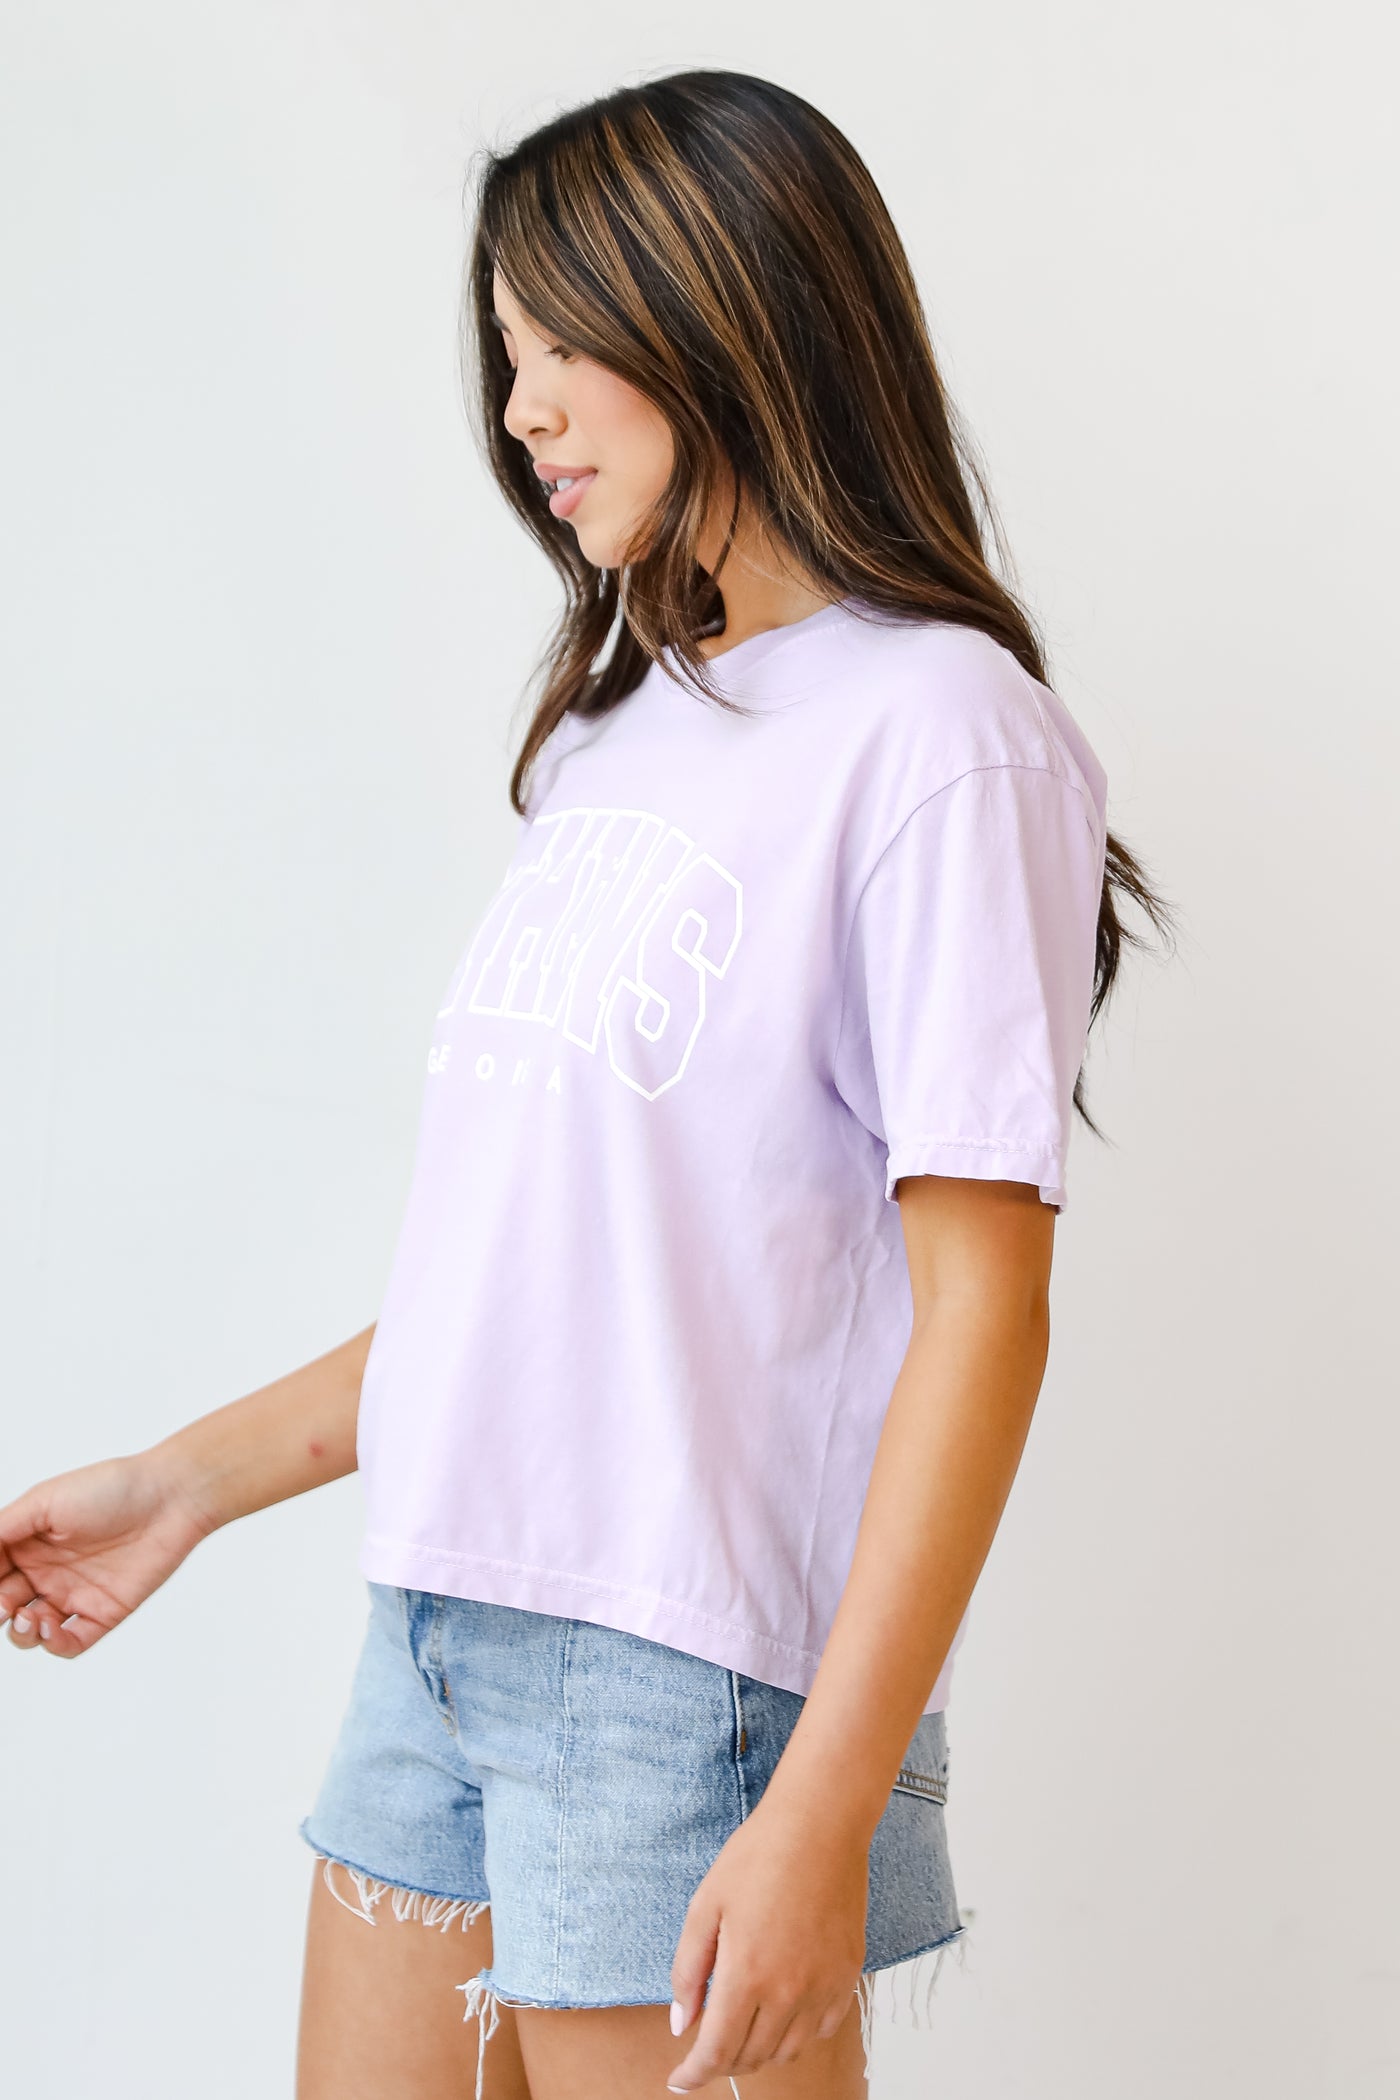 Lavender Athens Georgia Cropped Tee side view